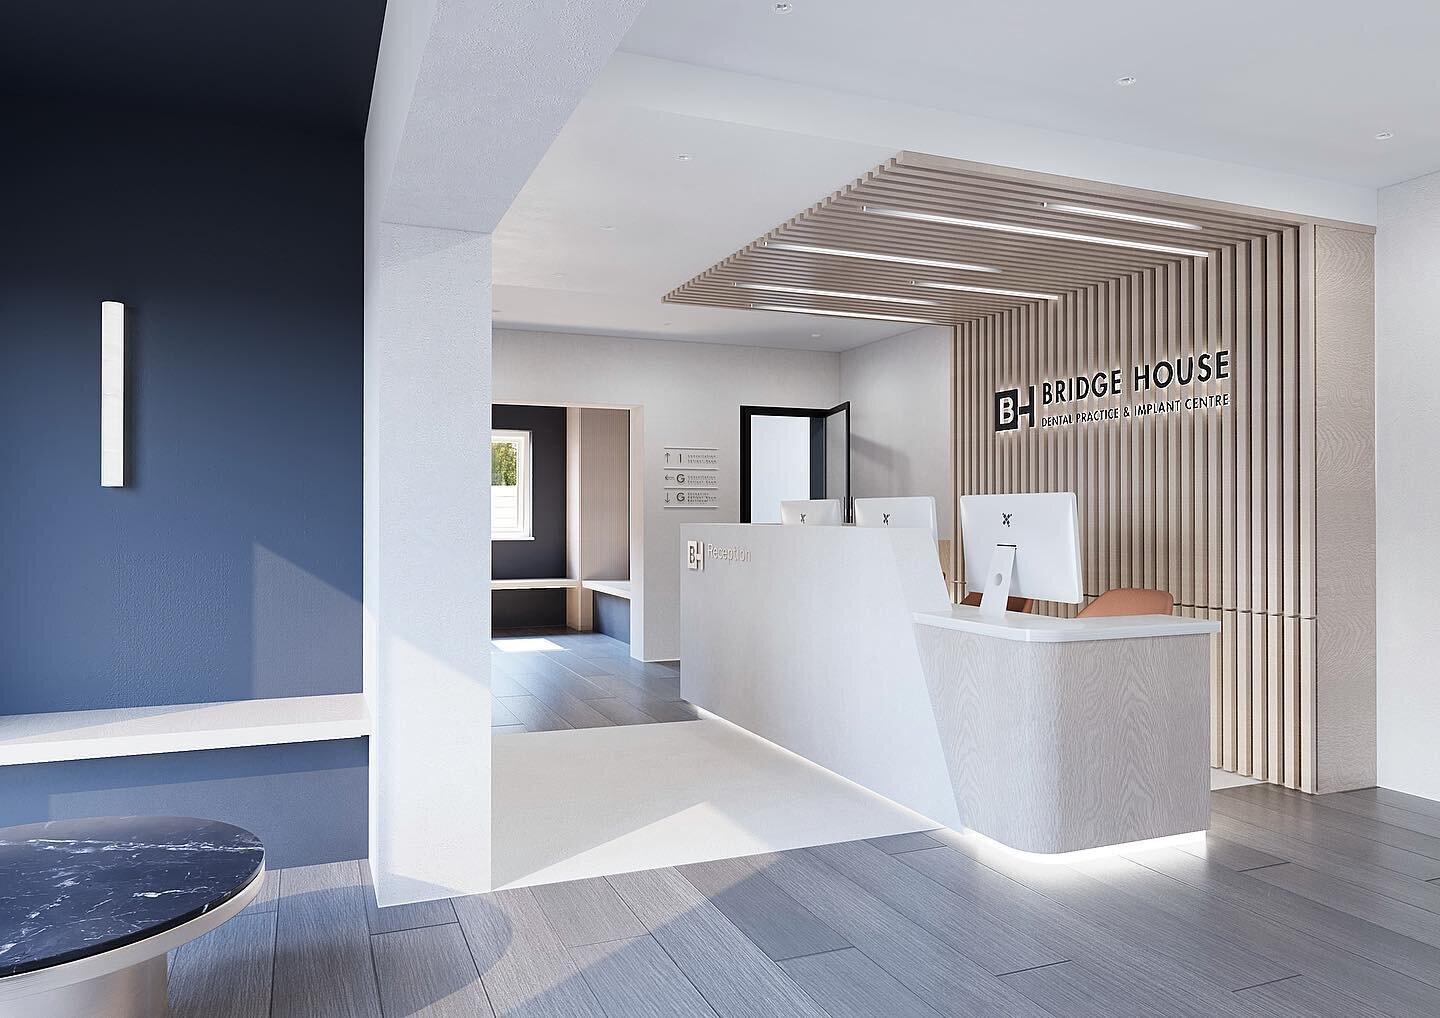 Pleased to share our latest private practice design CGI&rsquo;s for Bridge House Suffolk. Looking forward to seeing this come to fruition over the Autumn.
.
#maveninteriorstudio
.
.
.
#suffolk #dentistsuffolk #privatepractice #interiorarchitecture #i